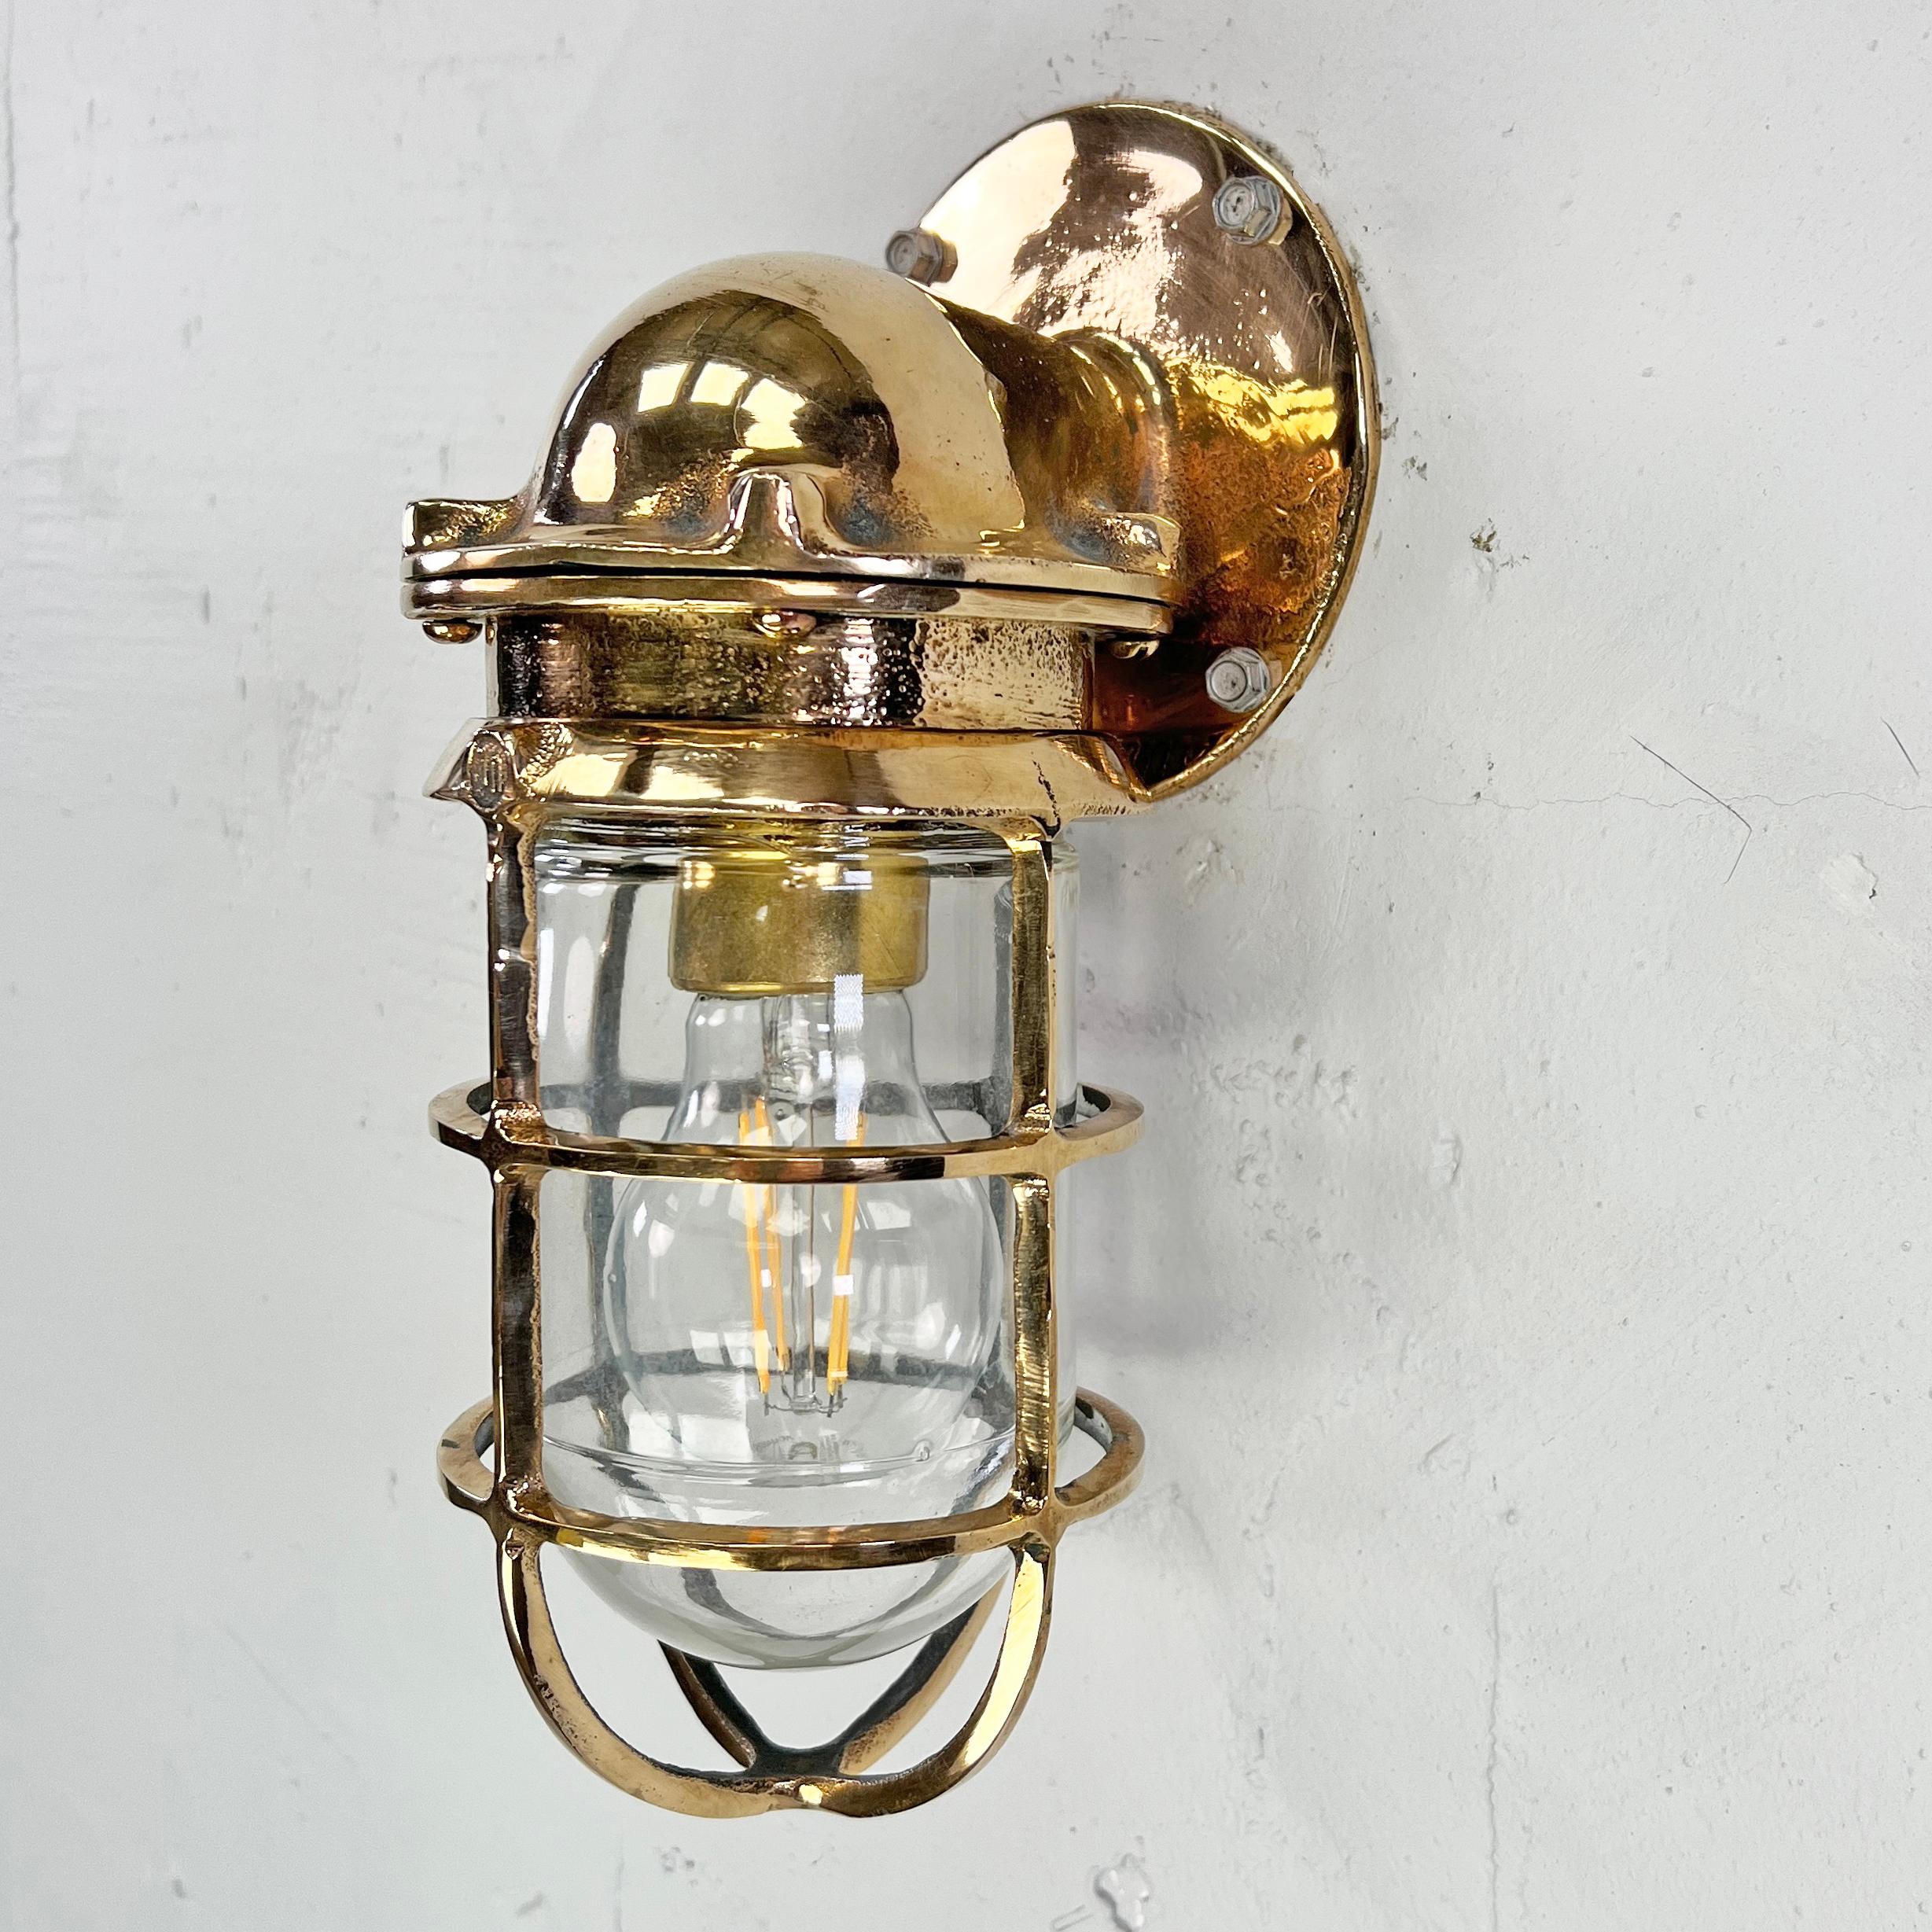 1960's American Cast Bronze & Glass Wall Sconce with Cage by Oceanic UL In Good Condition For Sale In Leicester, Leicestershire